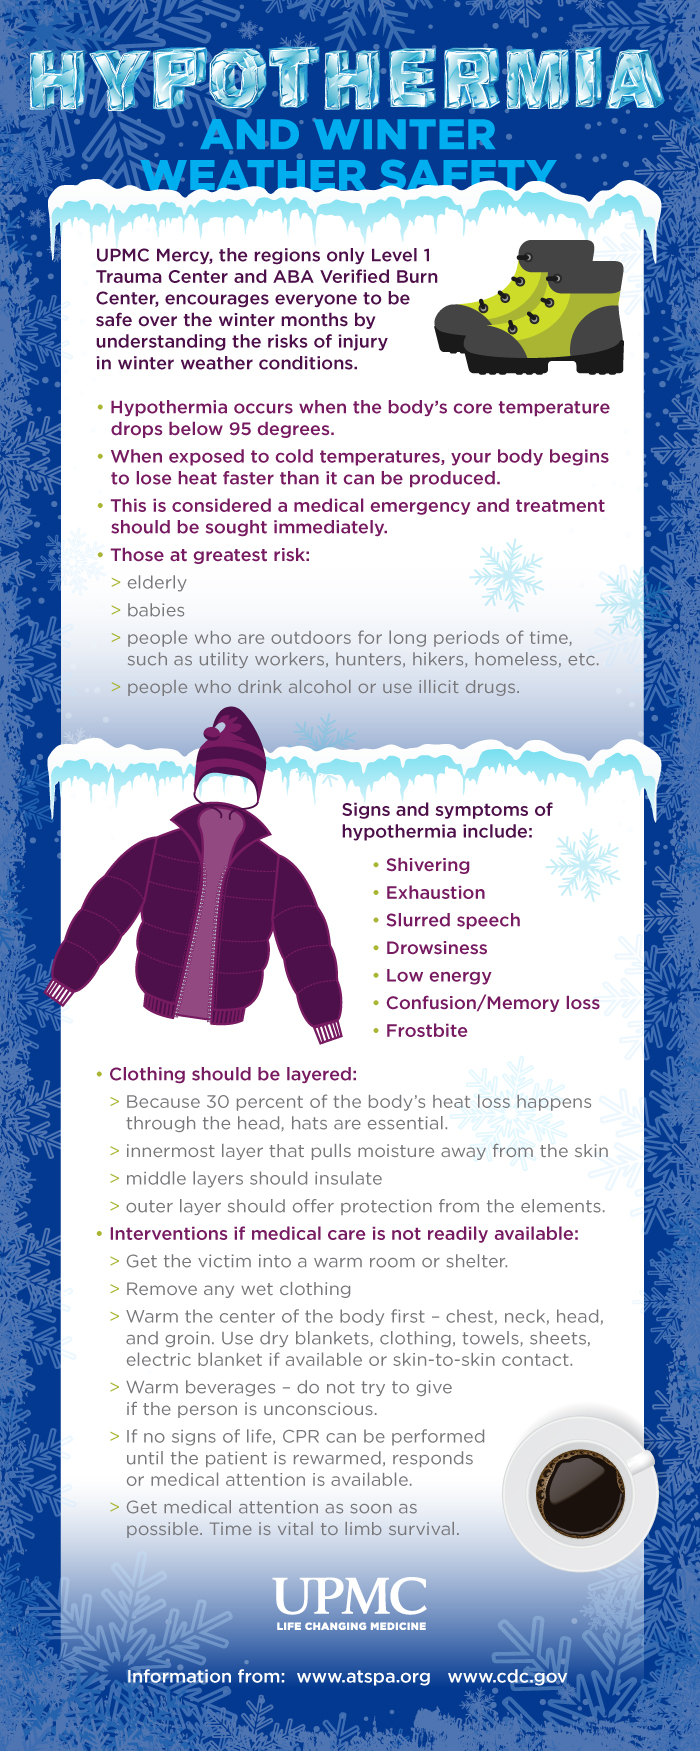 Hypothermia 101: UPMC Mercy Offers Tips